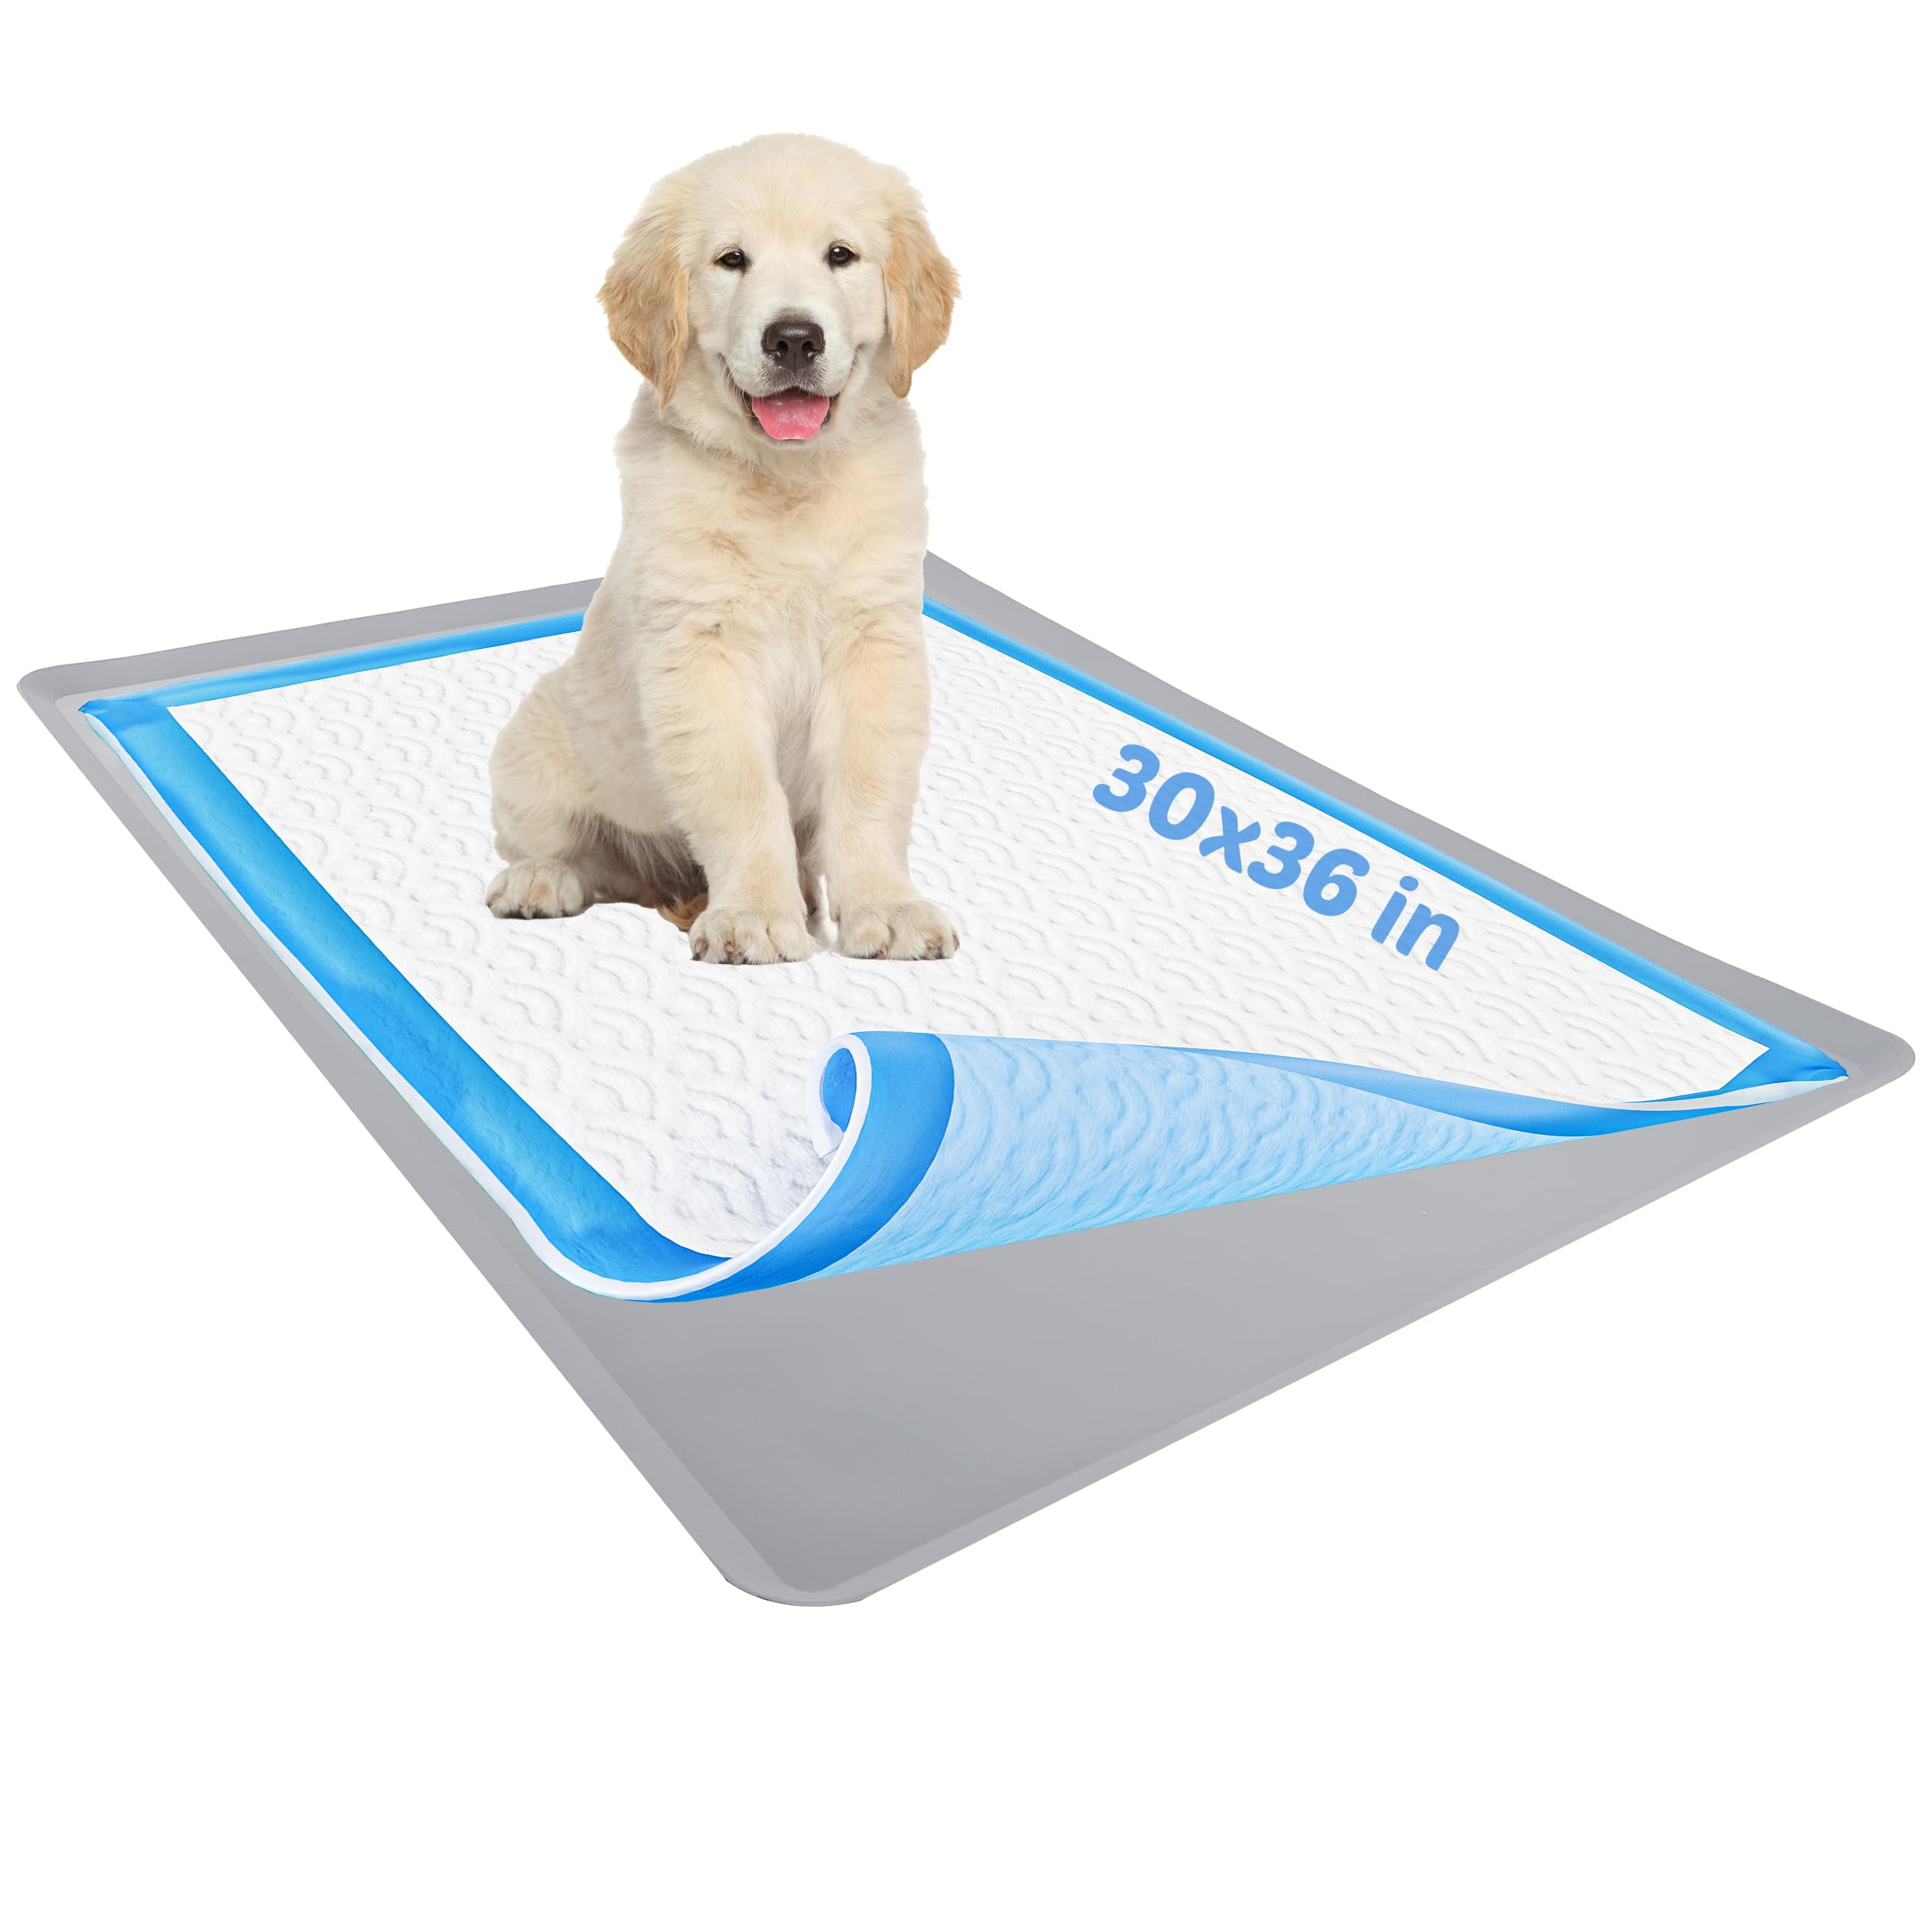 Skywin Dog Puppy Pad Holder Tray - No Spill Pee Pad Holder for Dogs - Pee  Pad Holder Works with Most Training Pads, Easy to Clean and Store (Beige) 